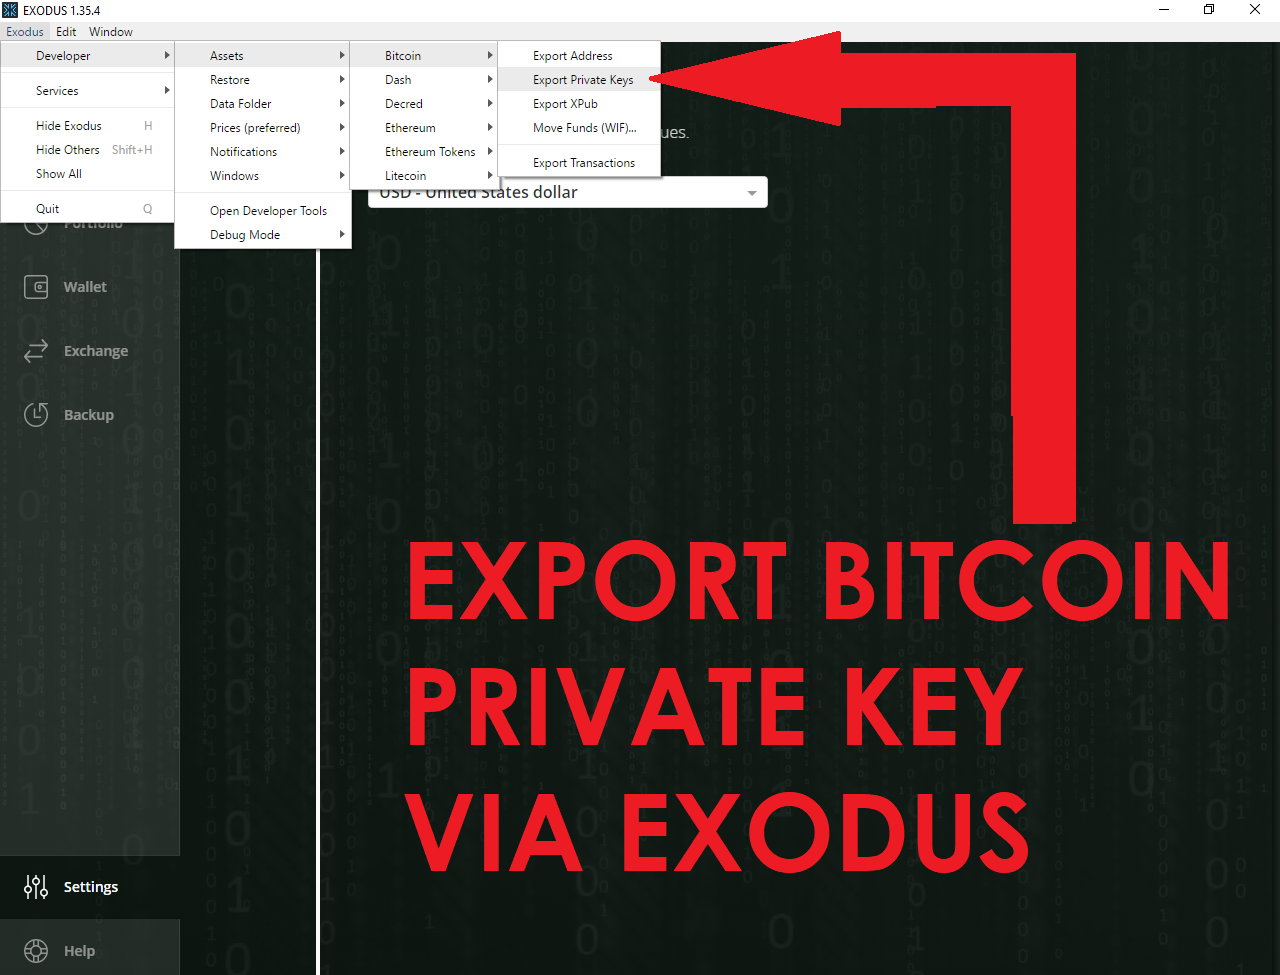 How do I view my private keys?